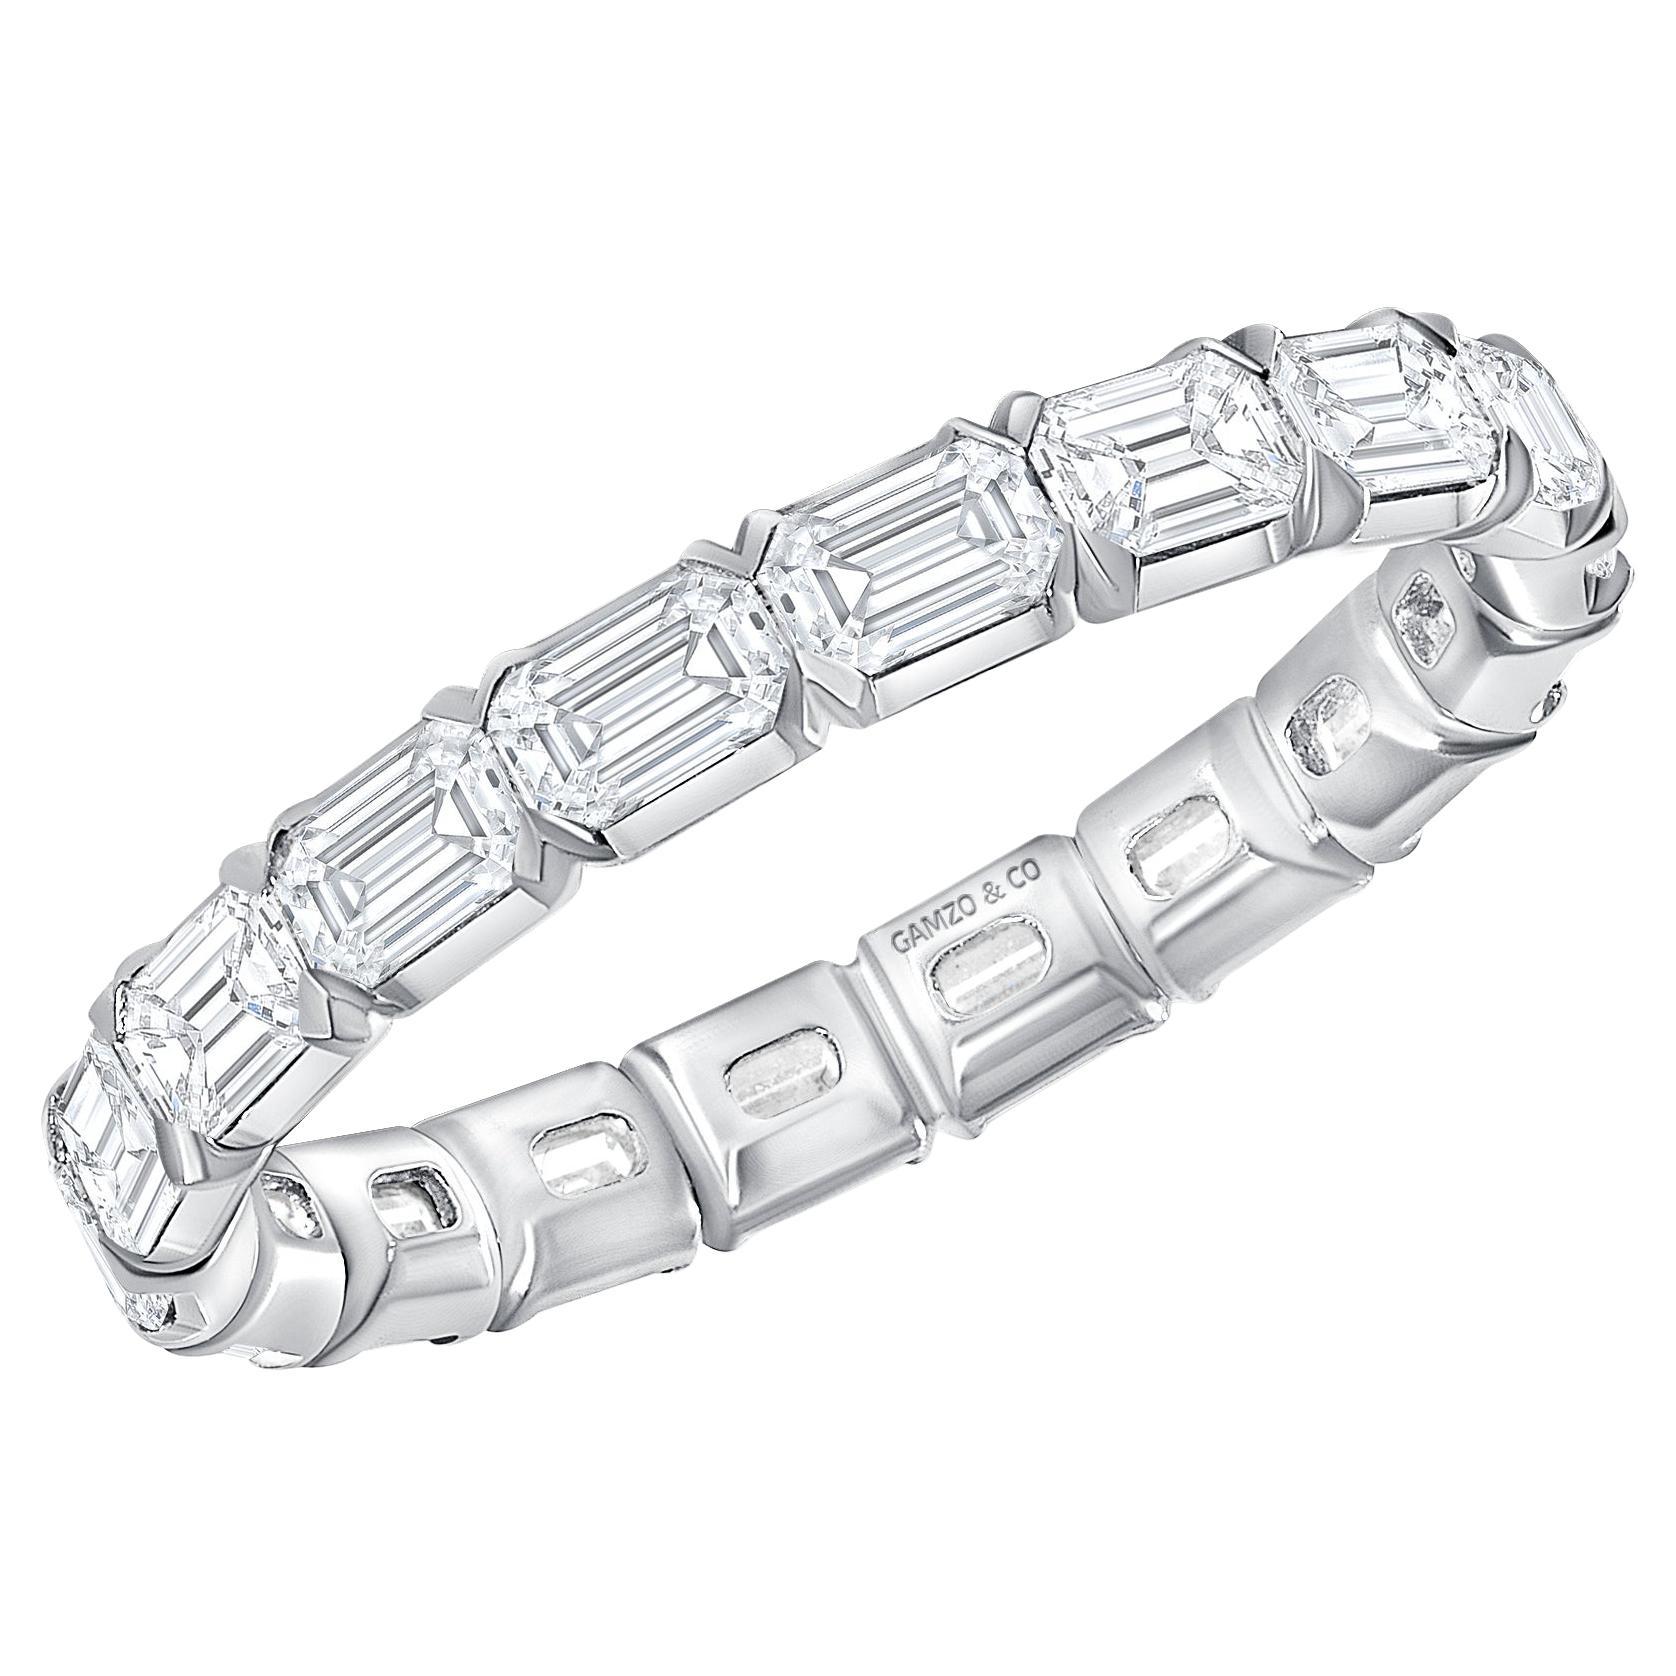 For Sale:  2.5 Carat East-West Diamond Eternity Band, Real Diamond Ring, 18k White Gold